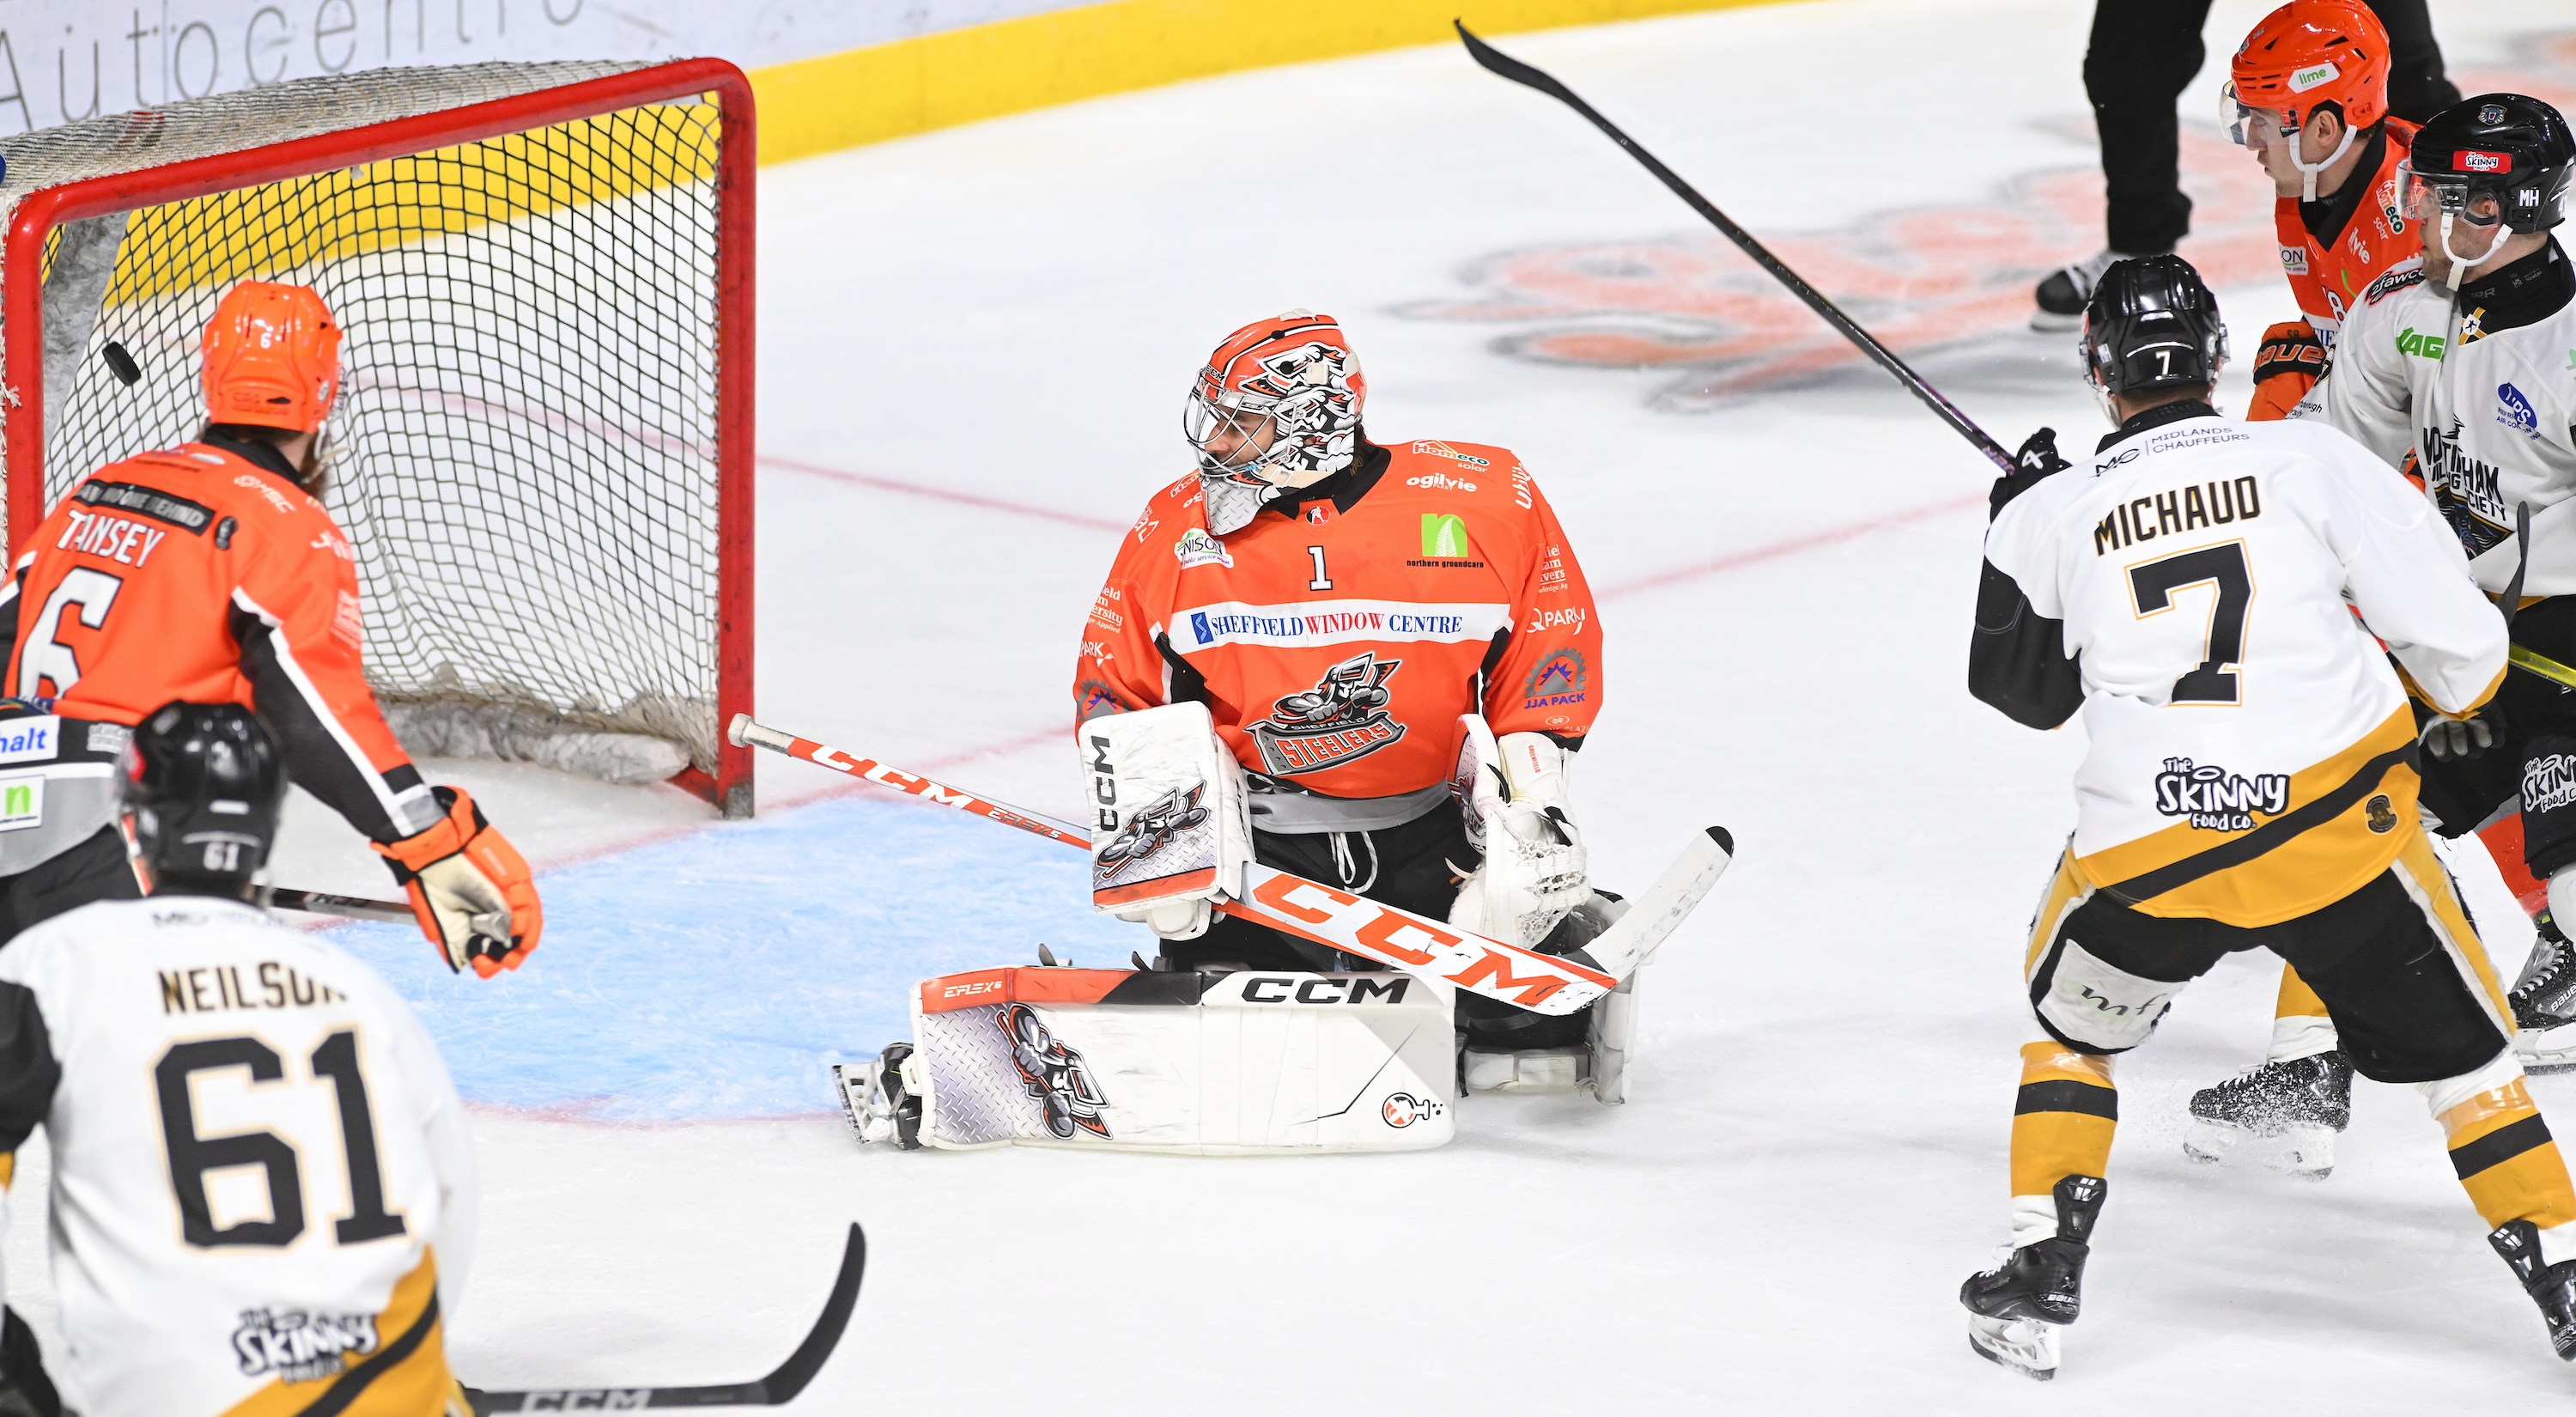 PREVIEW: PANTHERS VISIT SHEFFIELD ON SATURDAY NIGHT Top Image